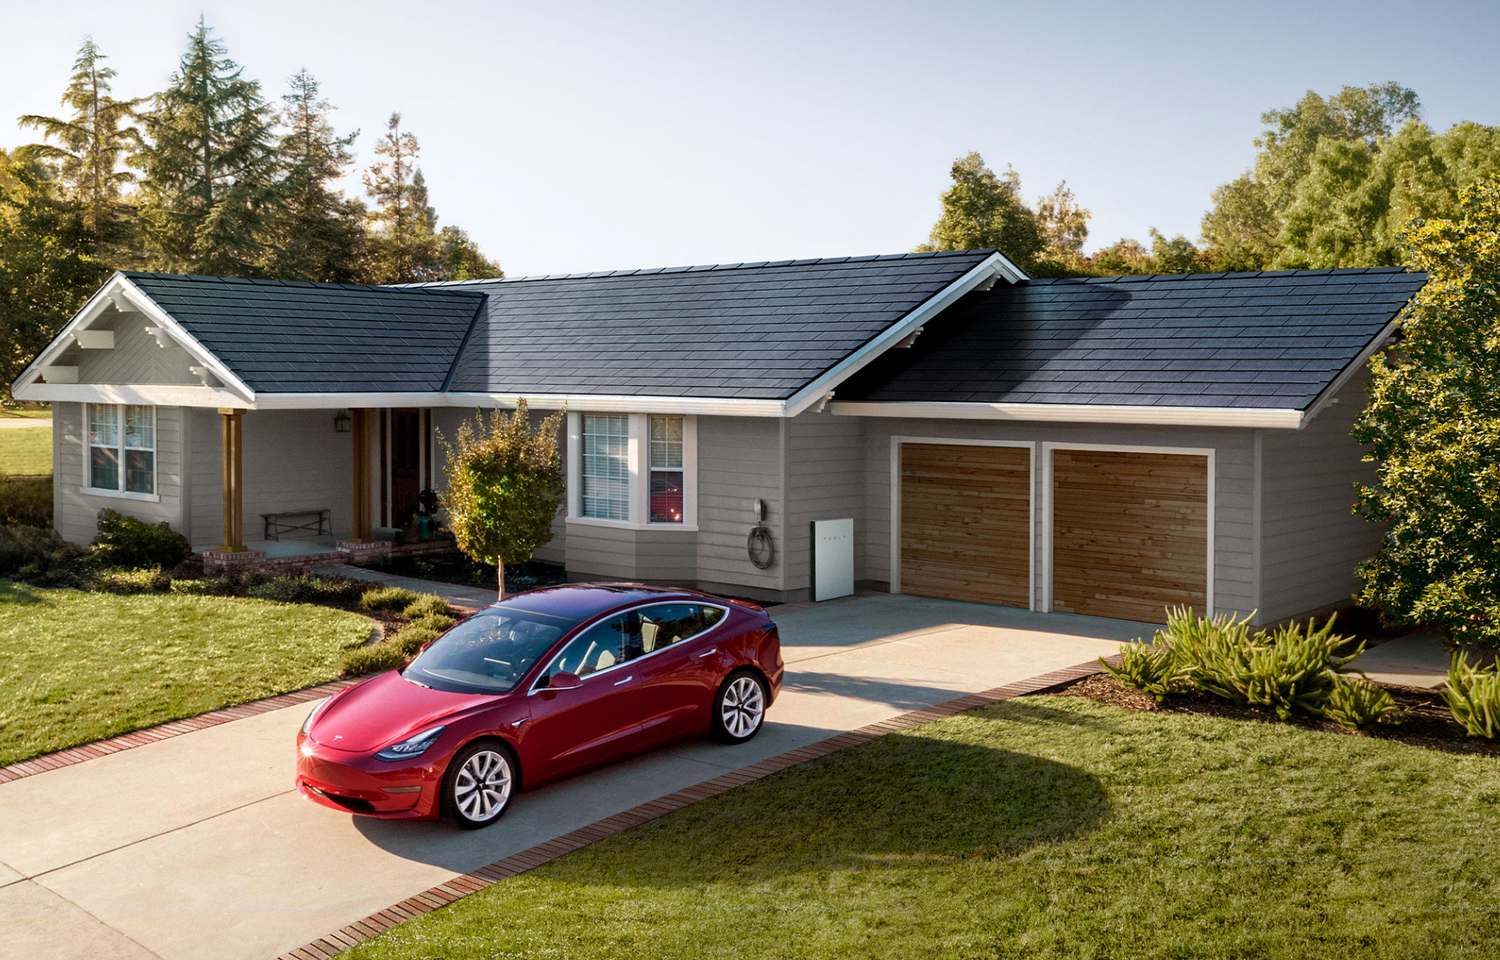 Tesla Solar Roof International Orders Officially Available